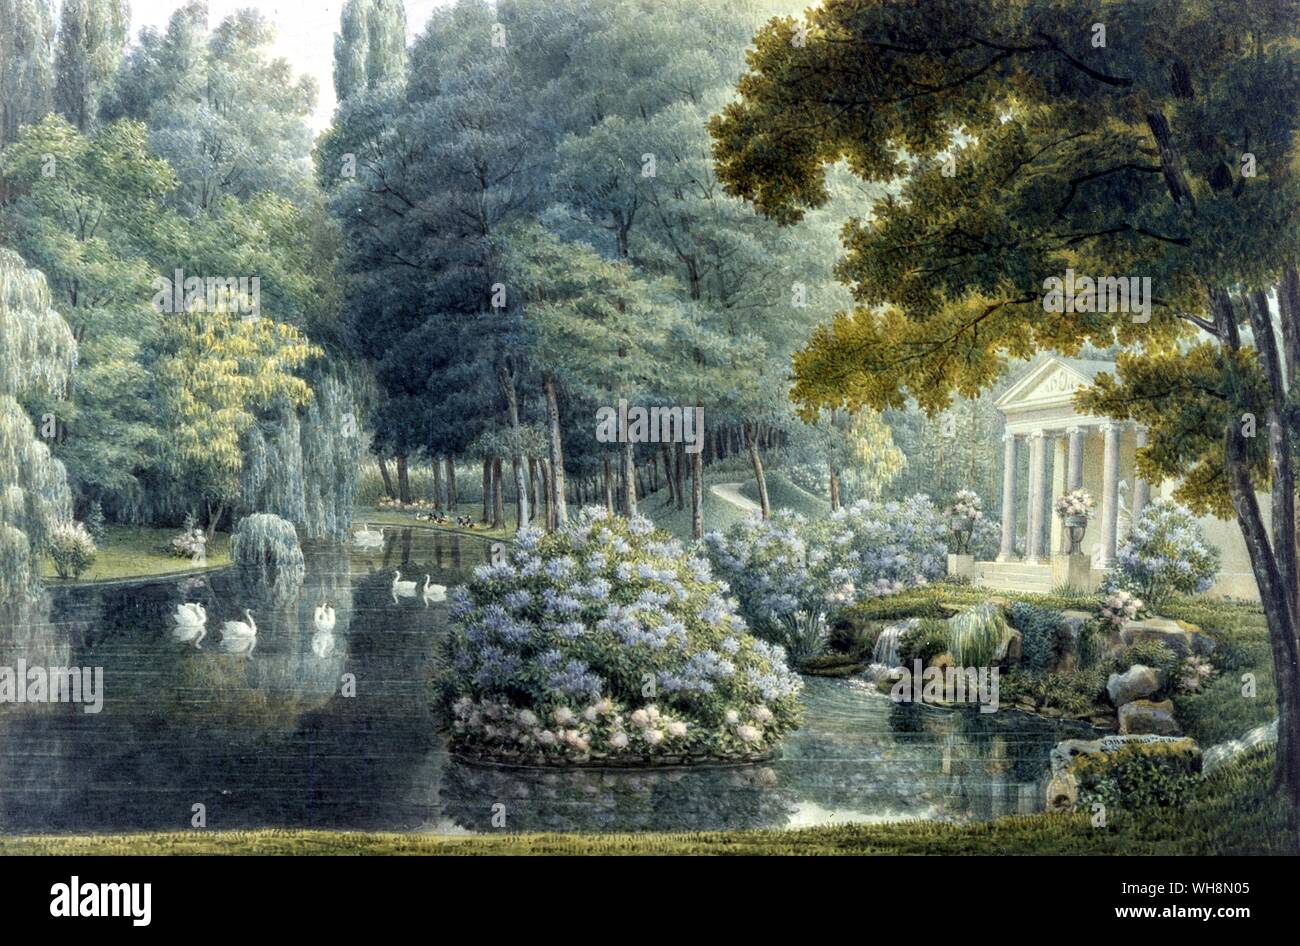 ... the English informal garden that Josephine (Bonaparte) took such joy in planting': The Temple of Love and the island of rhododendrons at Malmaison. One of a series of eight waterolours painted for her by Auguste Garneray. Collection Malmaison. Photos: Studio laverton. Stock Photo